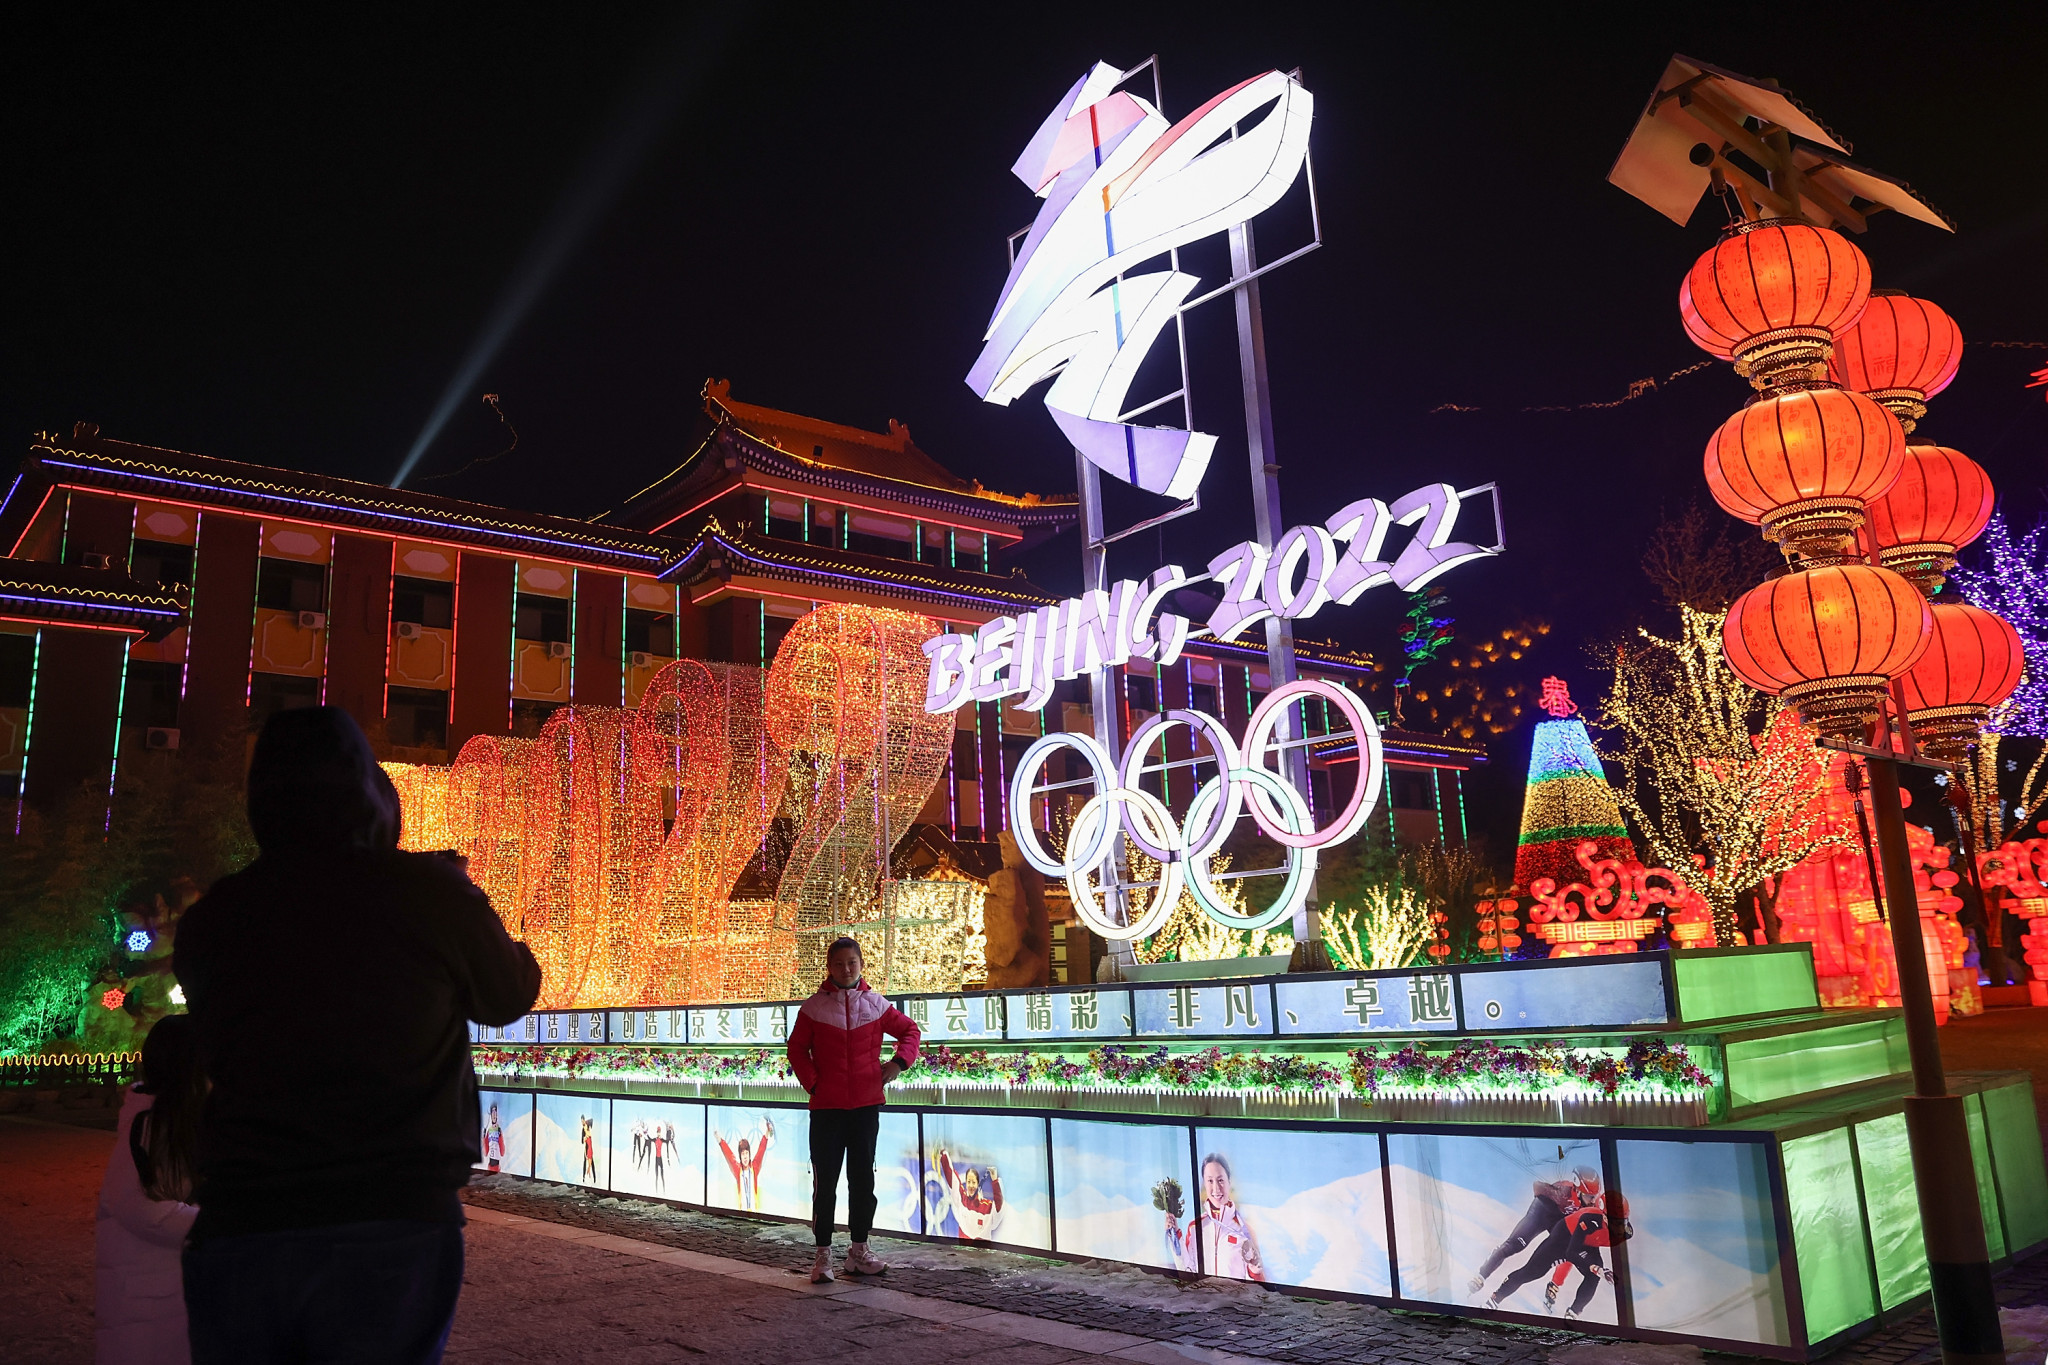 Beijing 2022 event held in New York City to help bring Games closer to American citizens